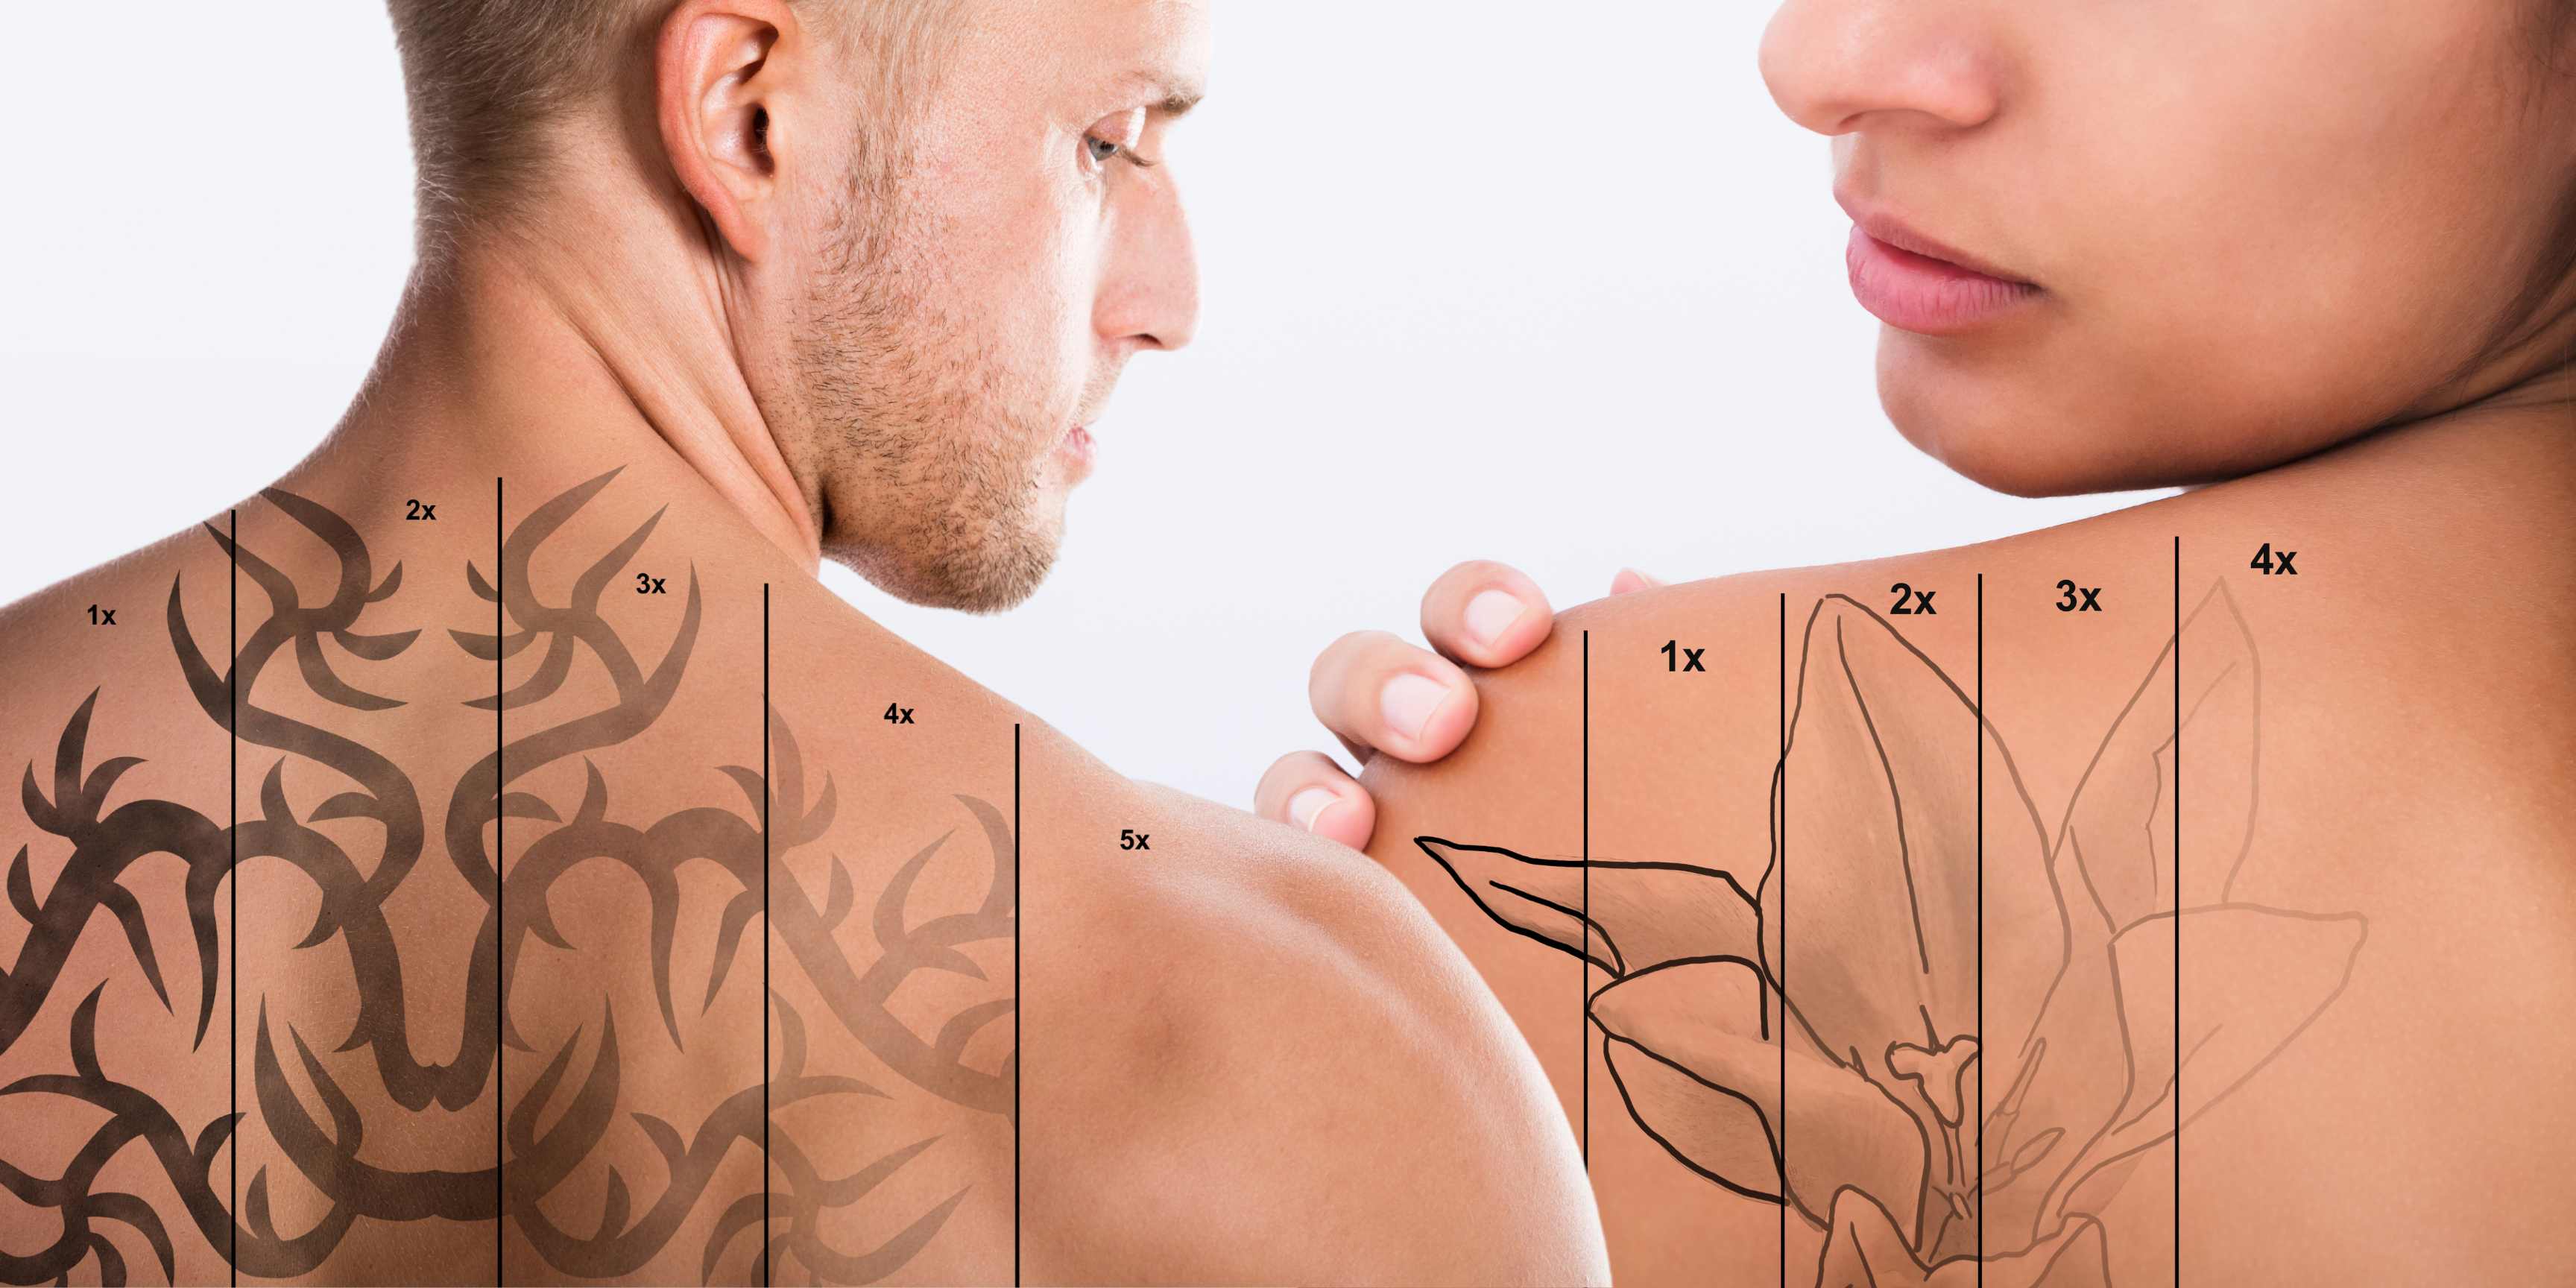 Bye Bye Ink Laser Tattoo Removal New York - Remove Unwanted Ink Safely